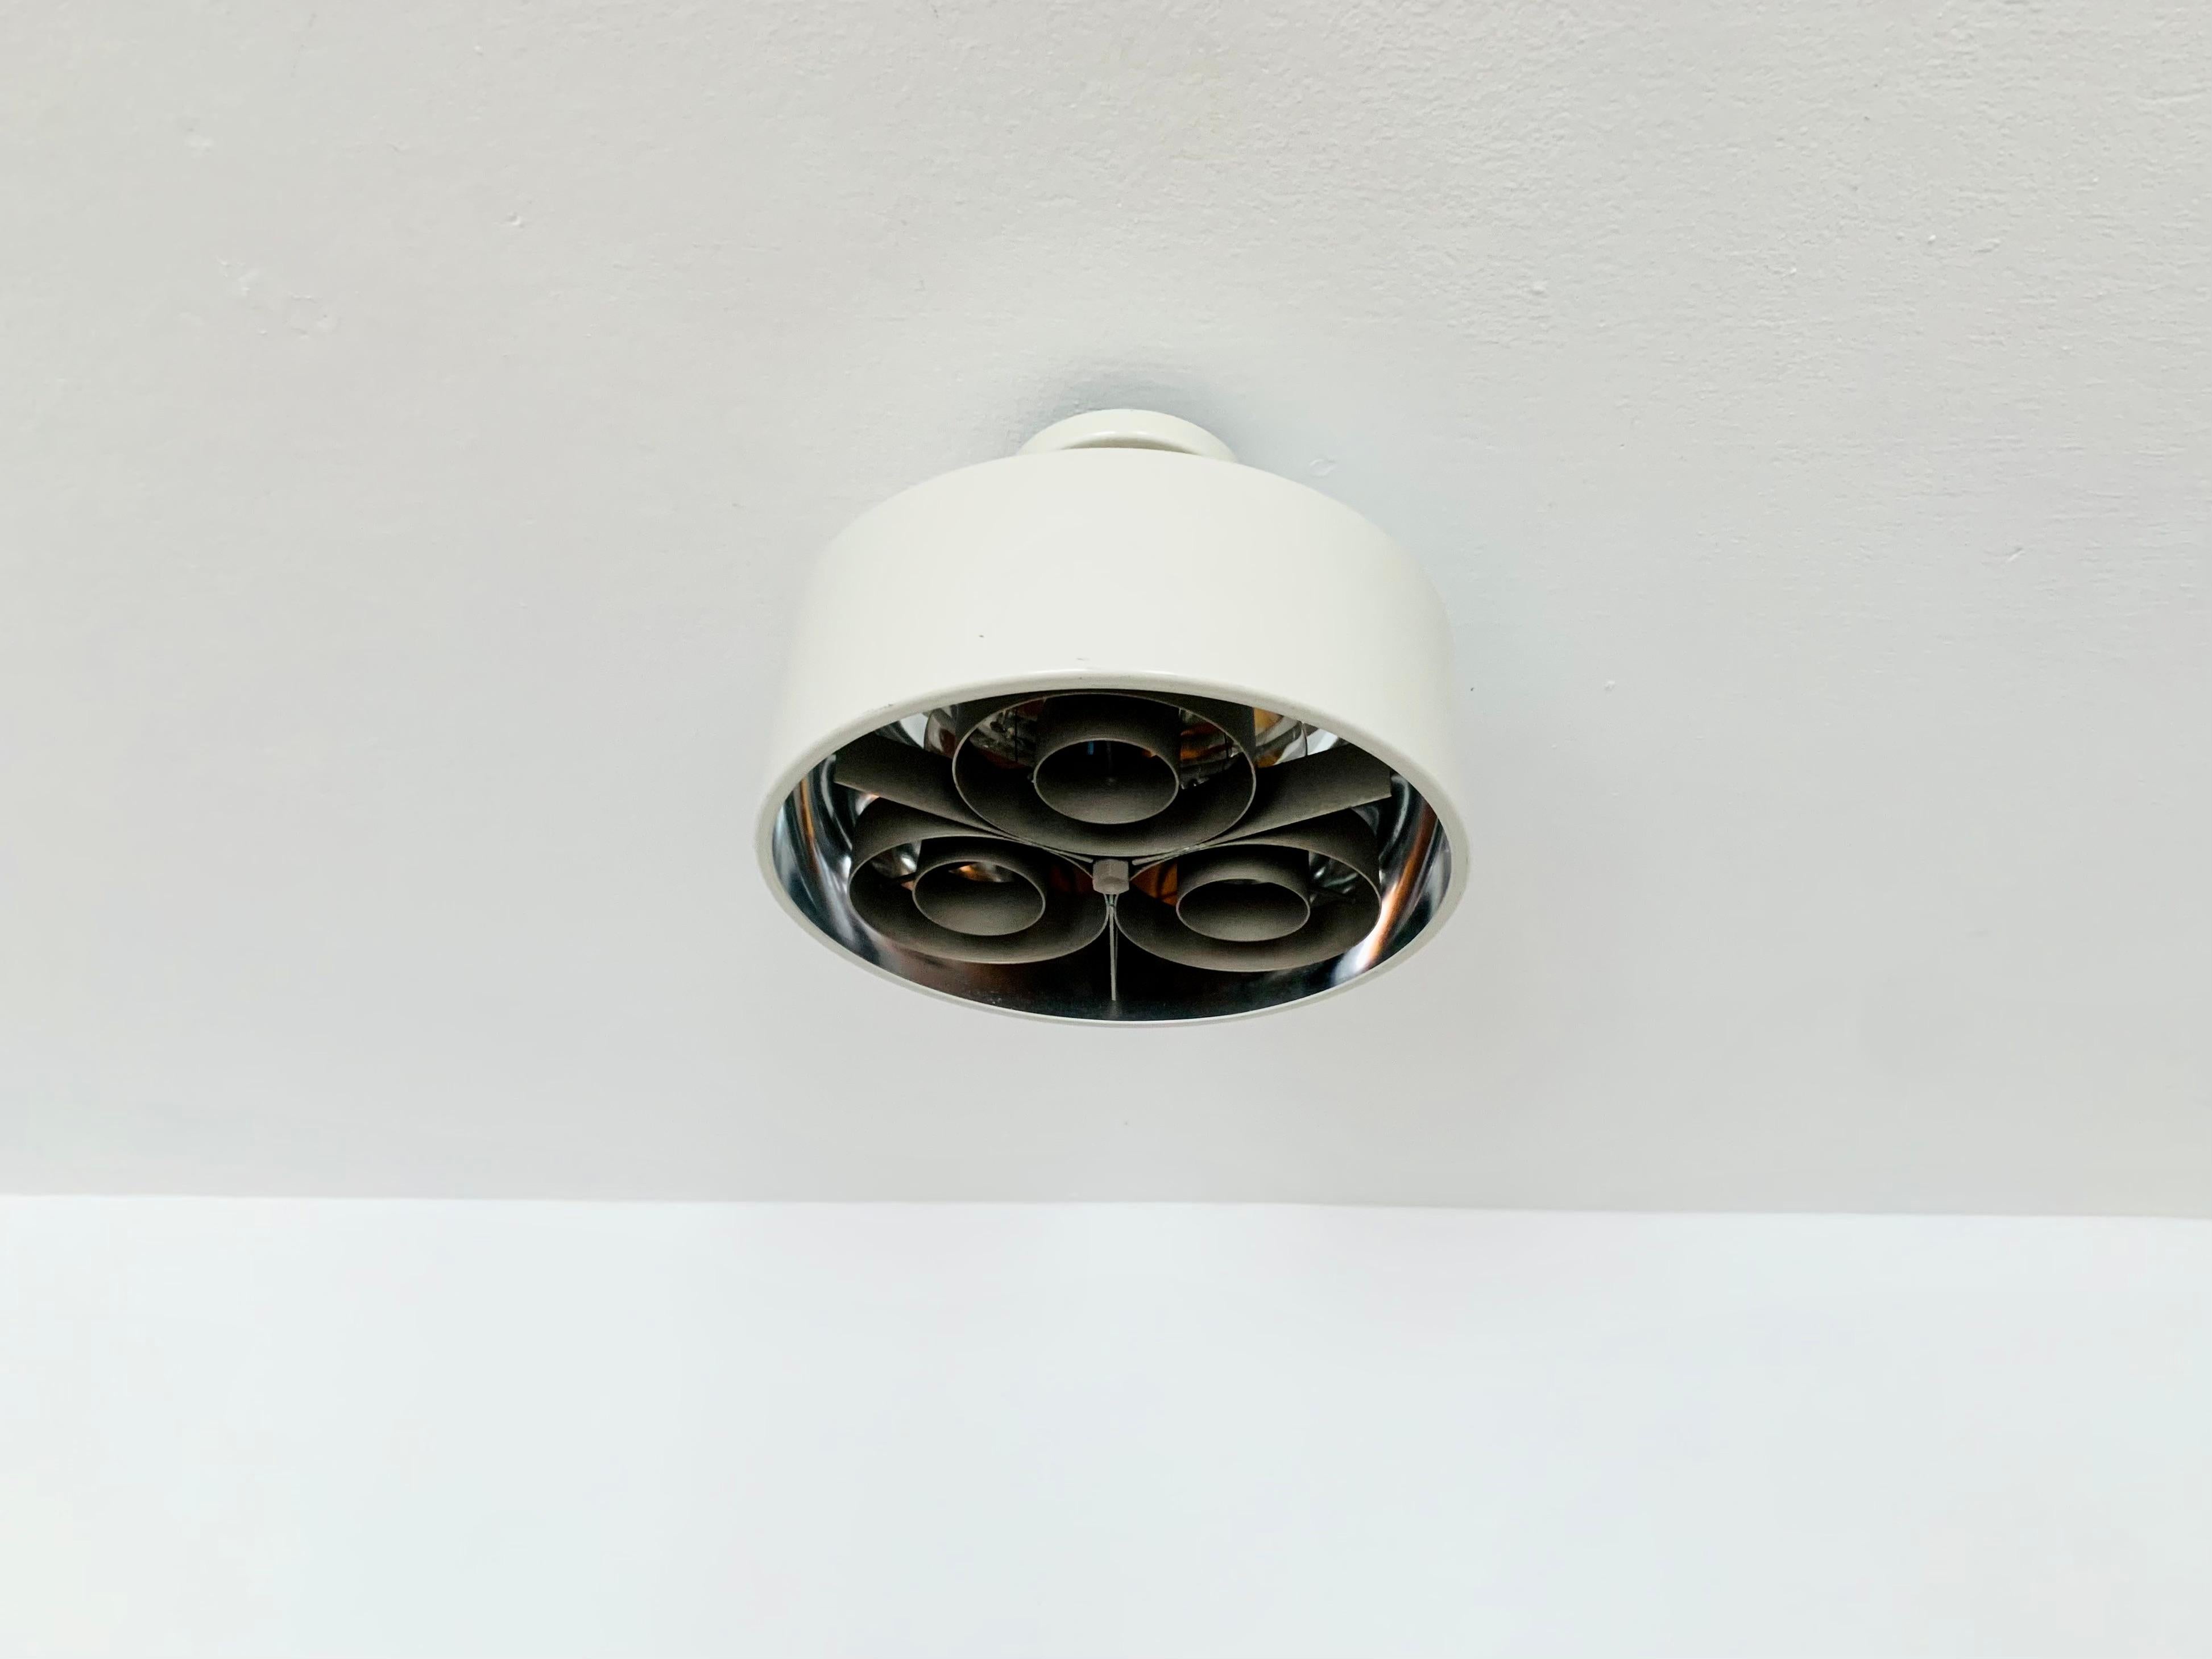 Swedish ceiling lamp from the 1960s.
Exceptional design and very high-quality workmanship.
The lamp is a highlight for every room.
The reflector creates a spectacular play of light

Condition:

Very good vintage condition with slight signs of wear